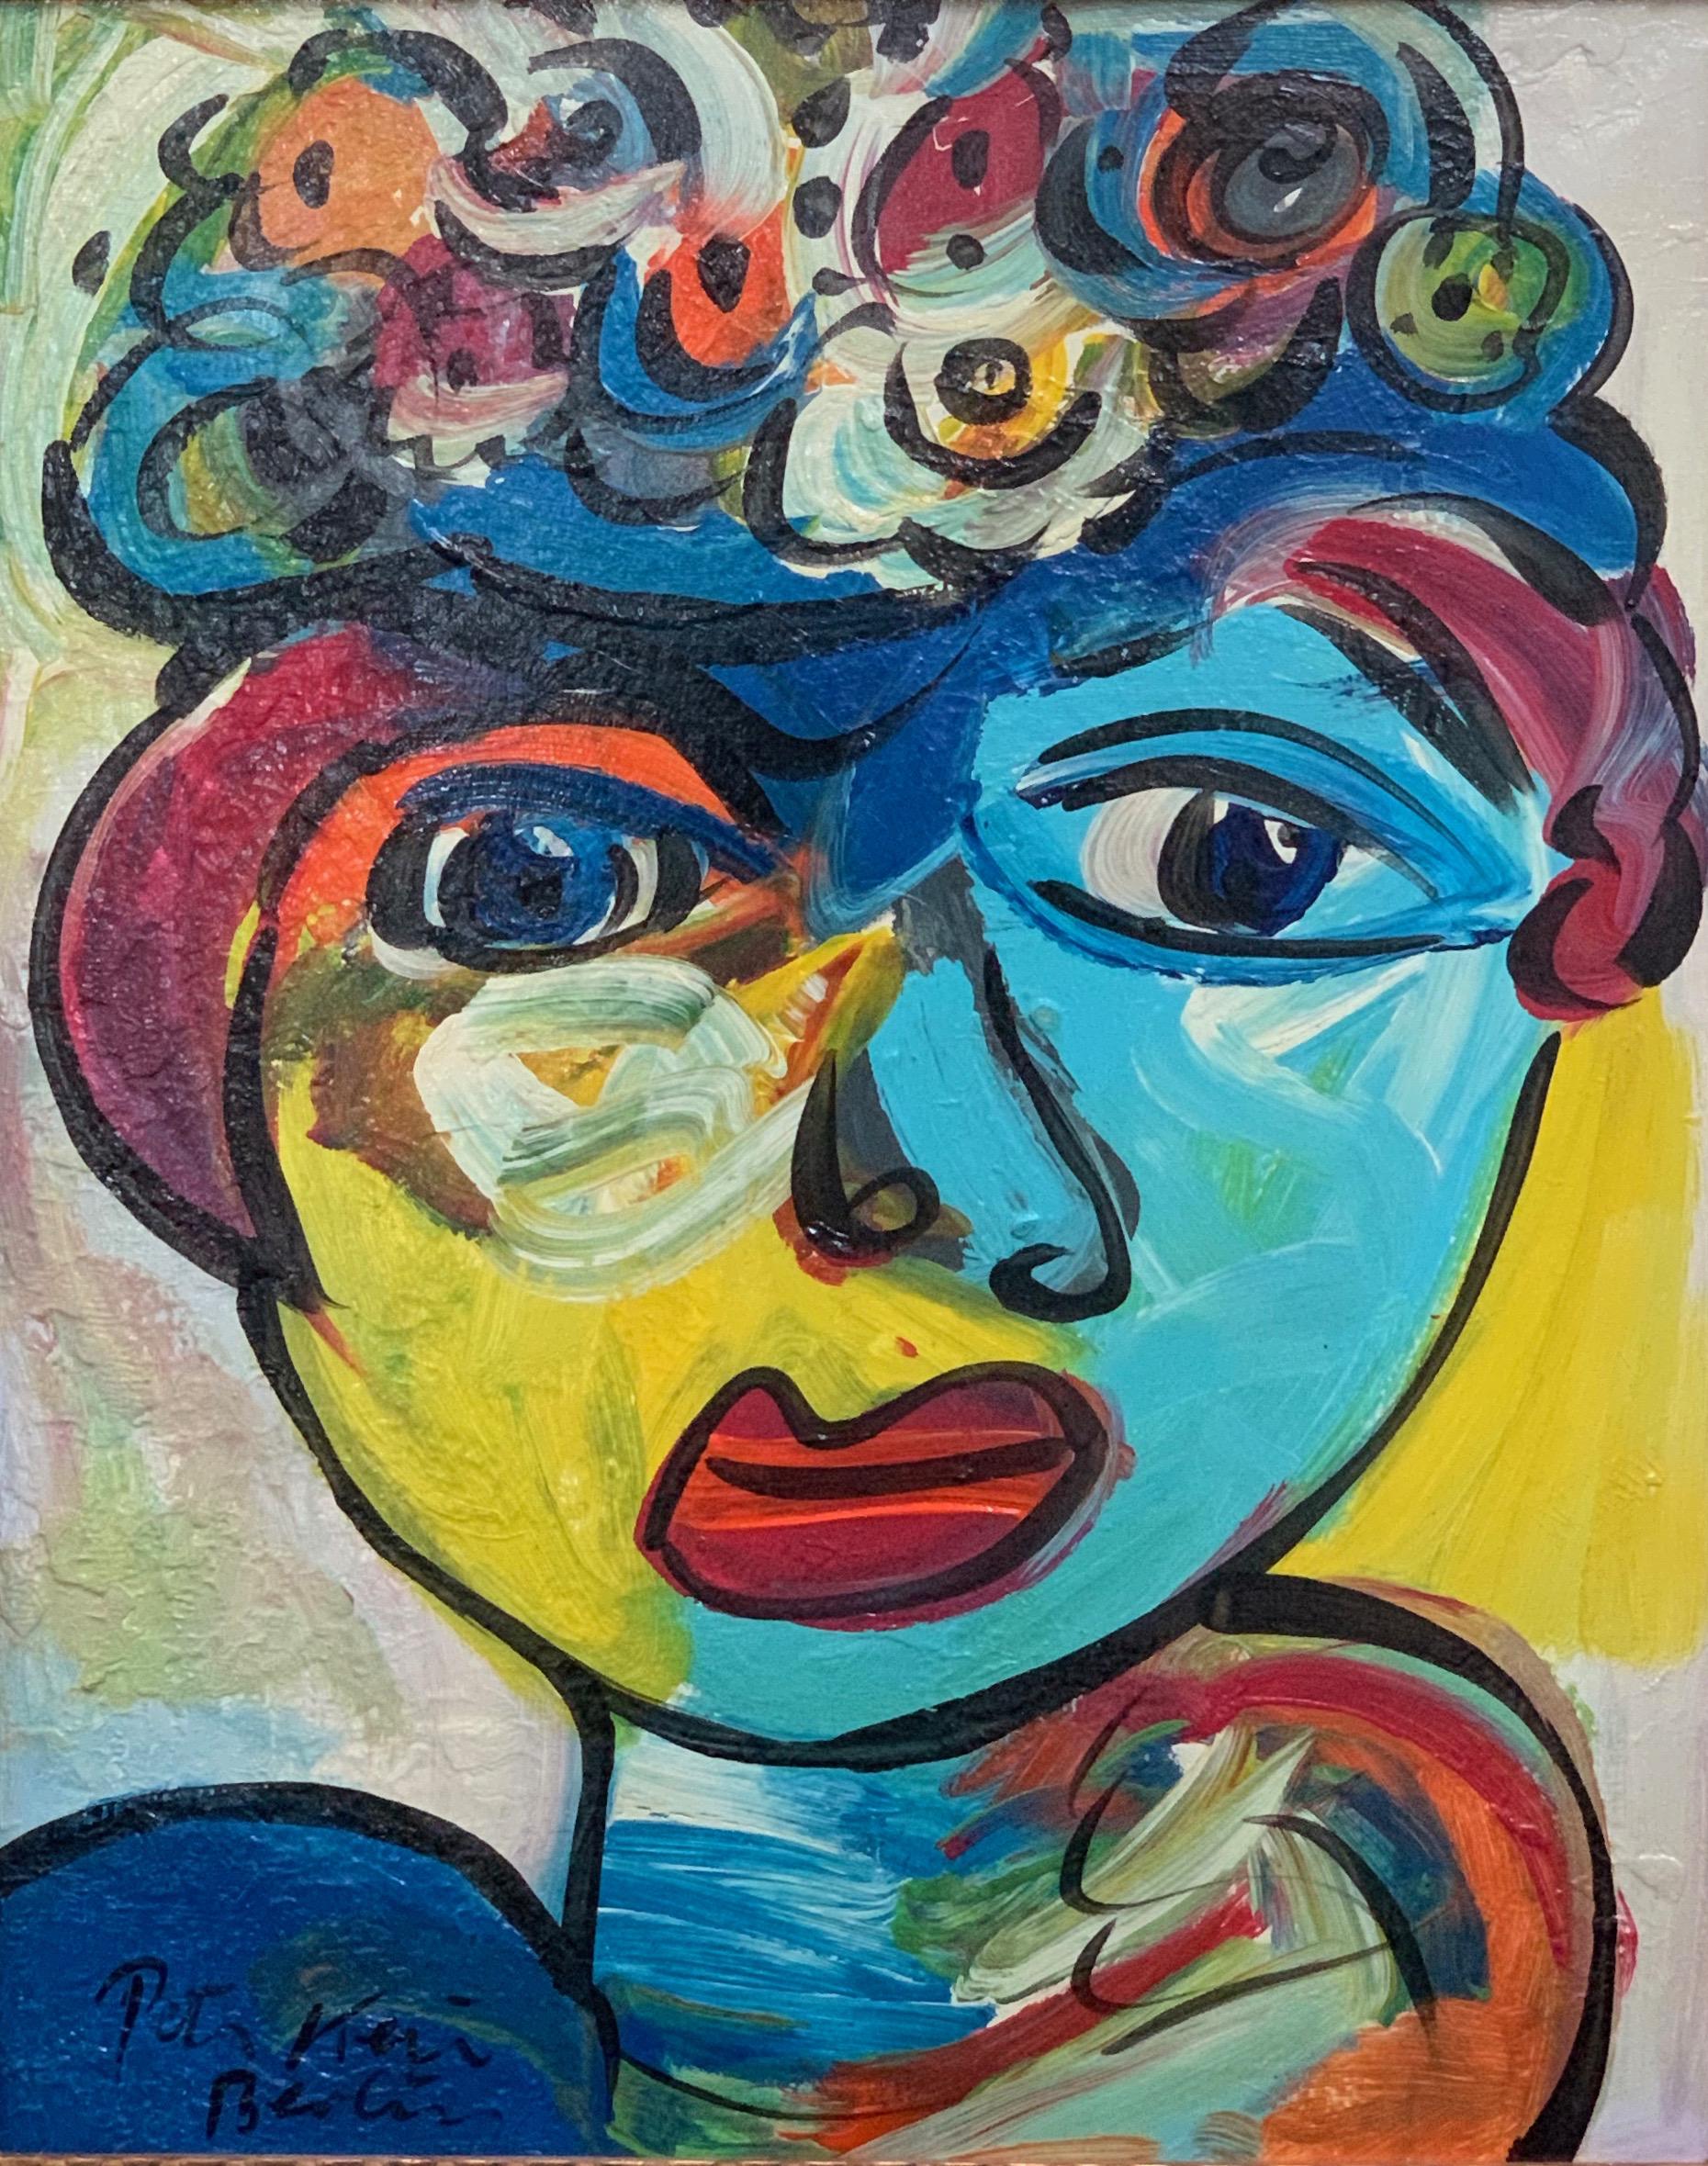 Expressionist framed oil on canvas portrait painting of a woman in a colorful hat, by Peter Robert Keil, created in his studio in Berlin. Signed on the front and marked 'Berlin